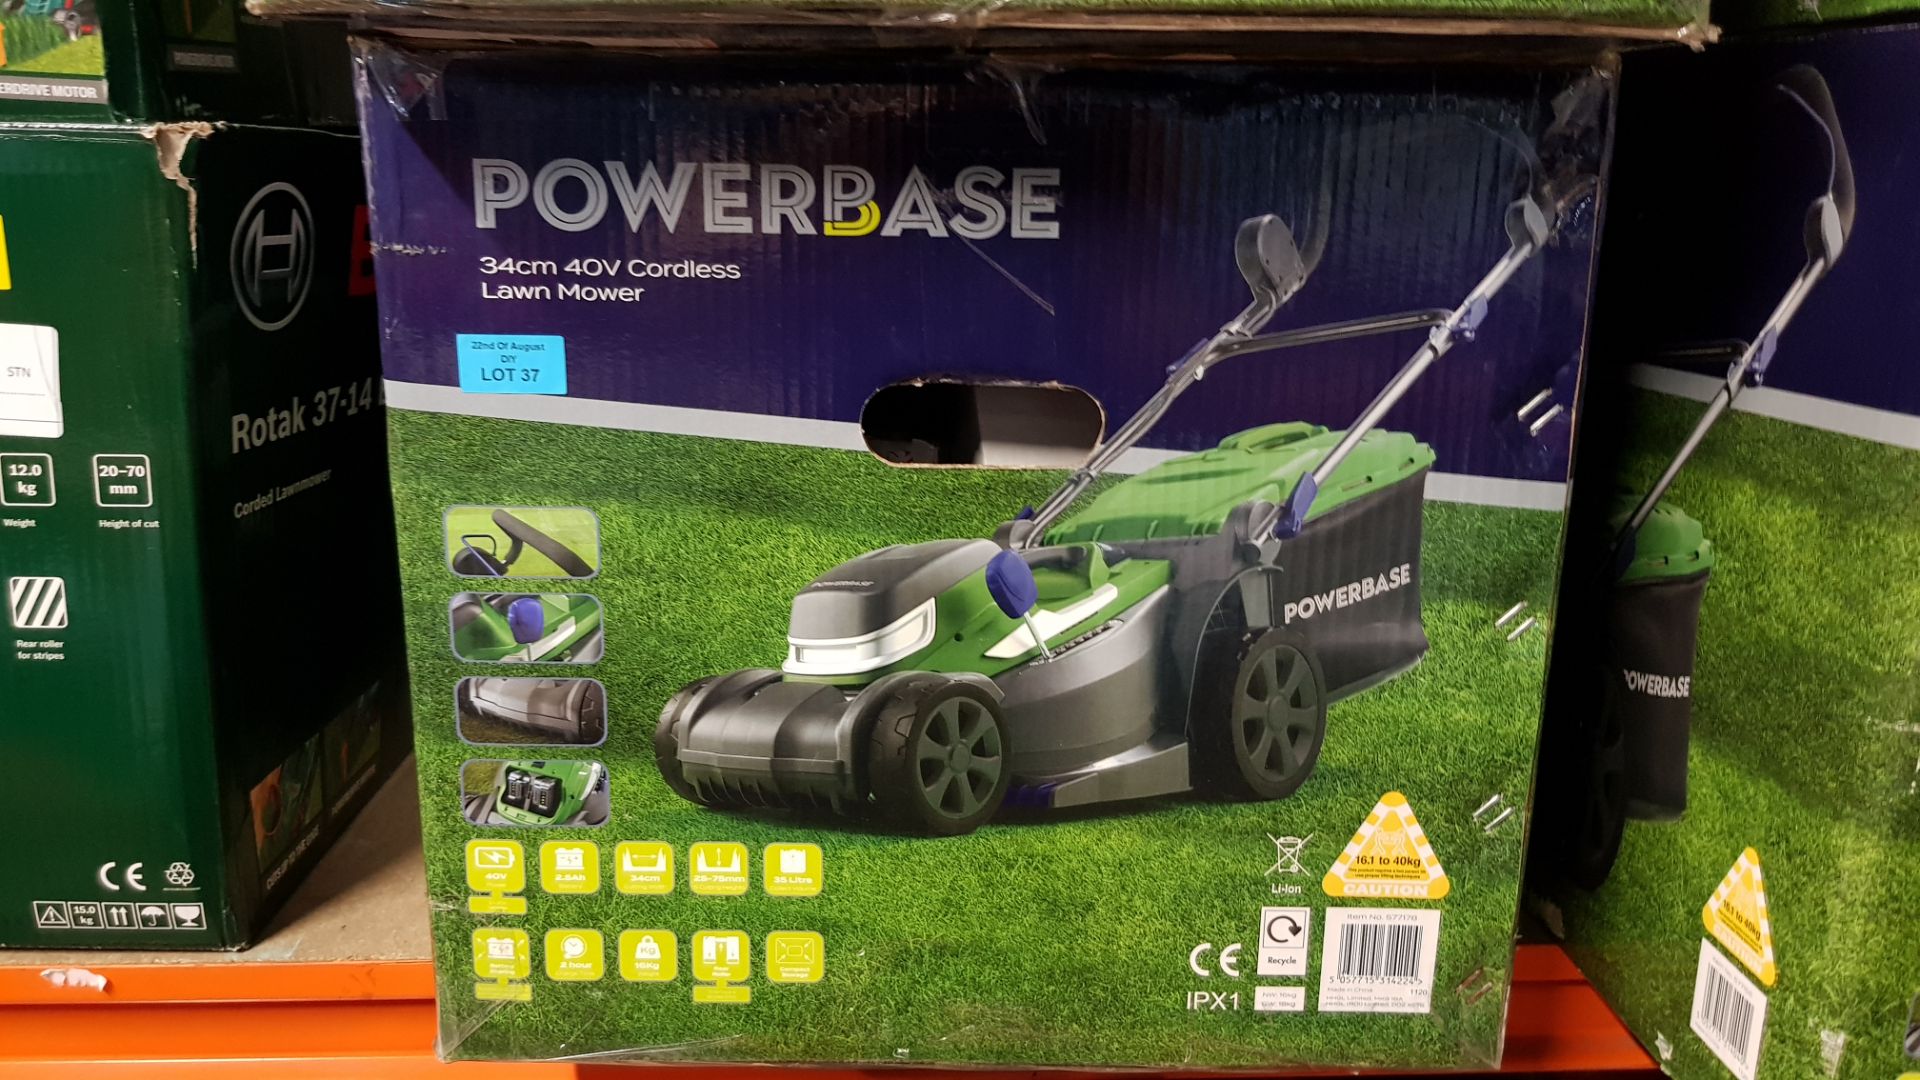 (R13C) 1x Powerbase 34cm 40V Cordless Lawn Mower RRP £169. (Unit Has Battery & Charger). - Image 4 of 4